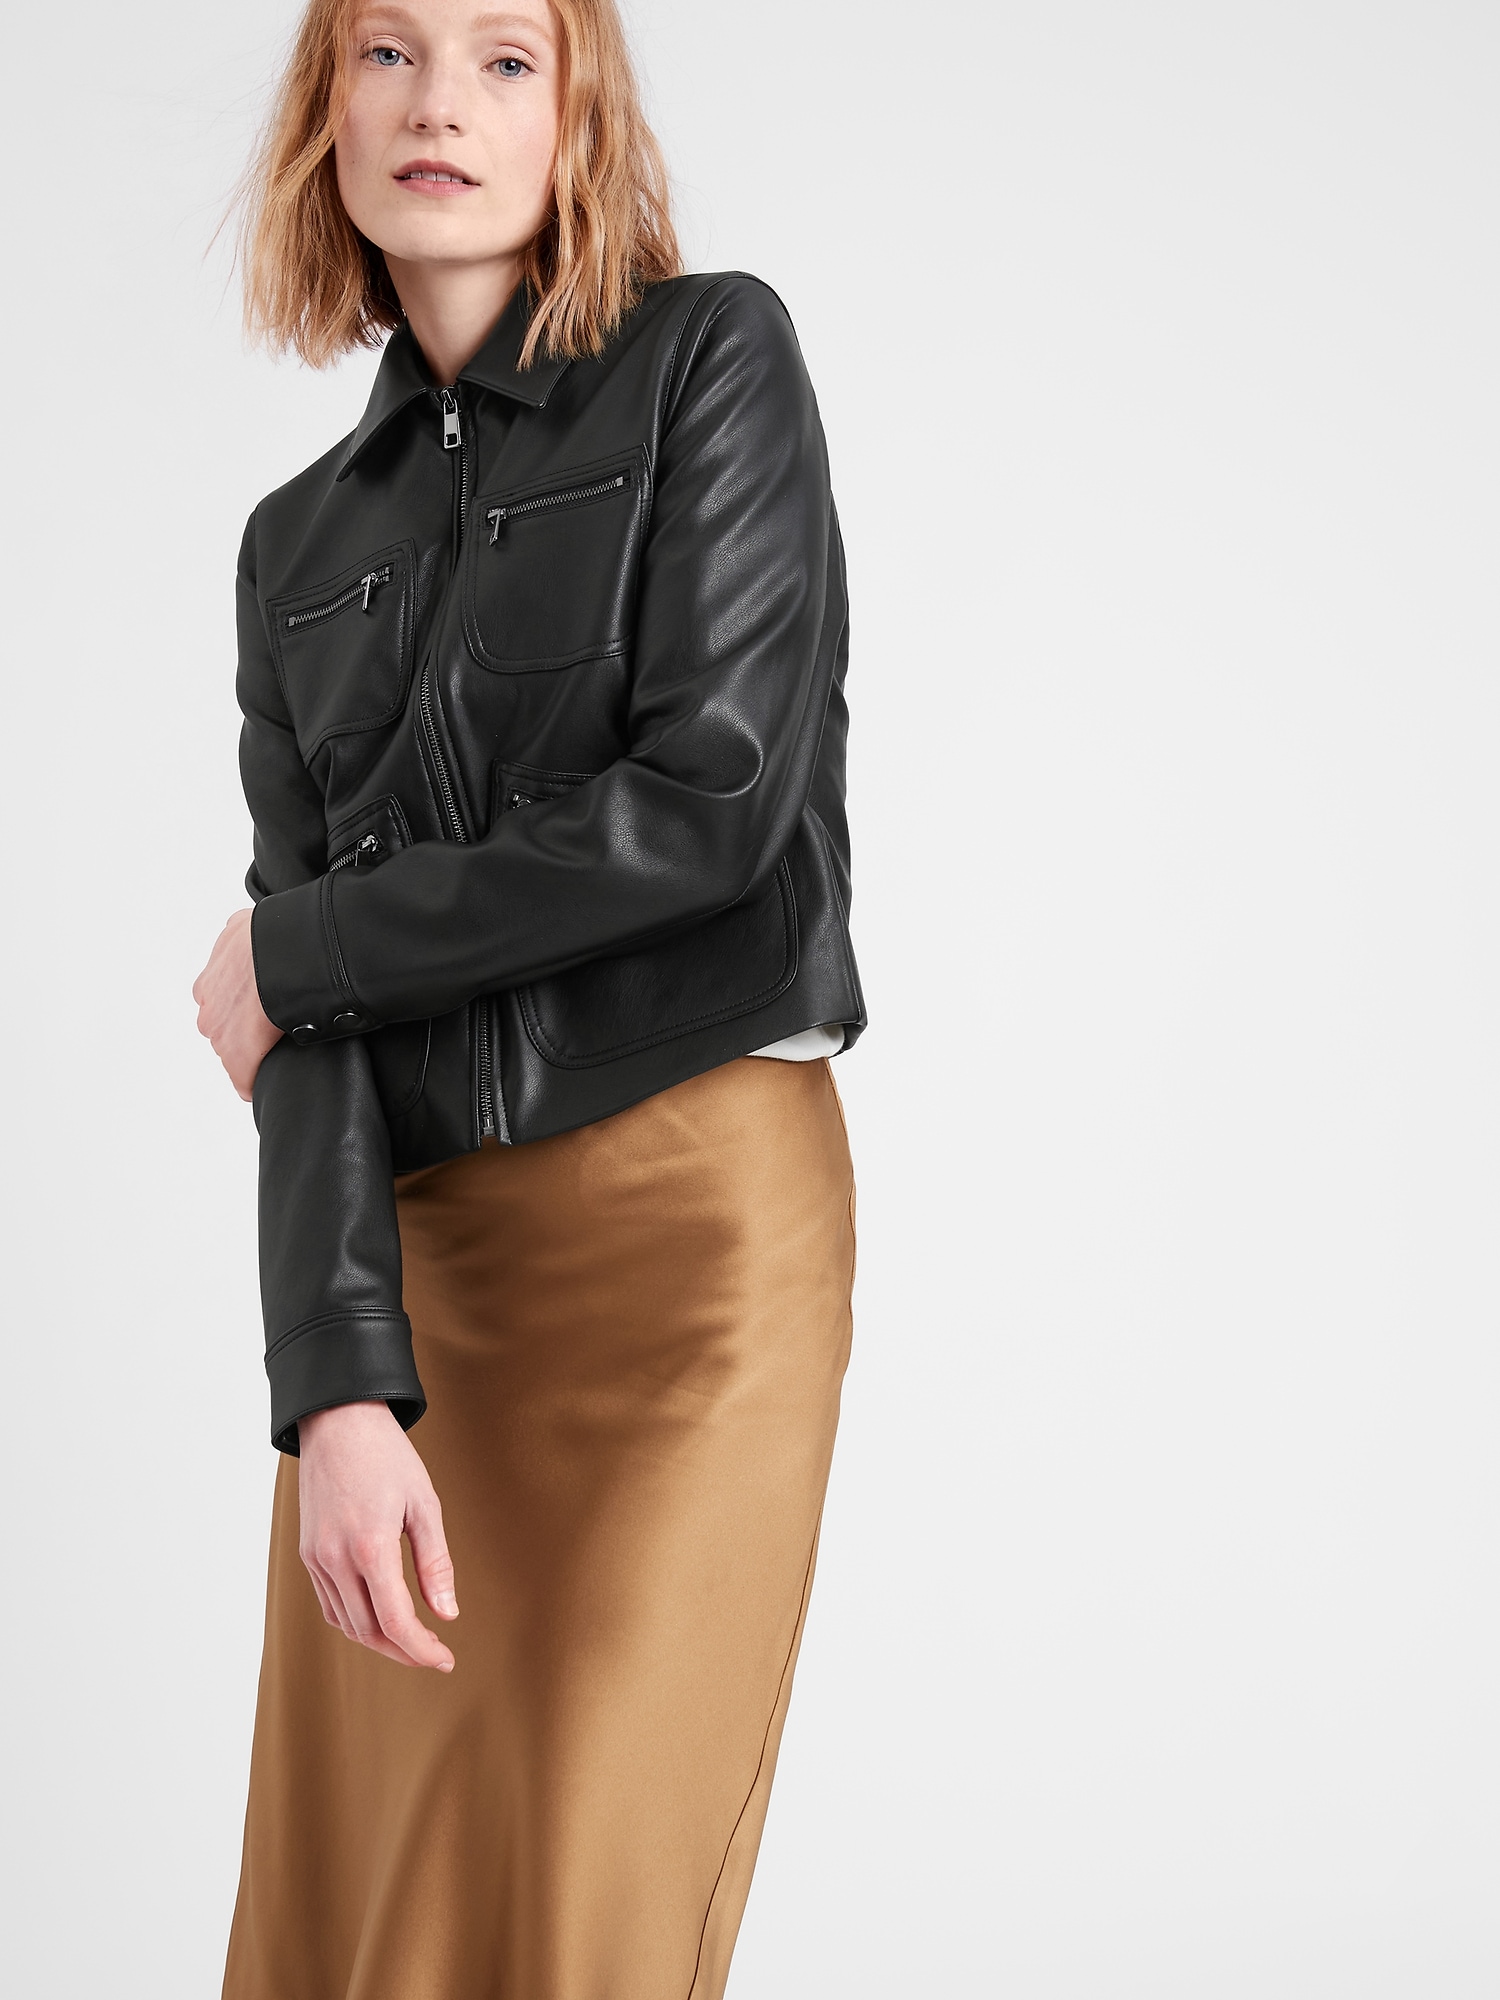 Banana Republic Quilted Faux Leather Mini, $89